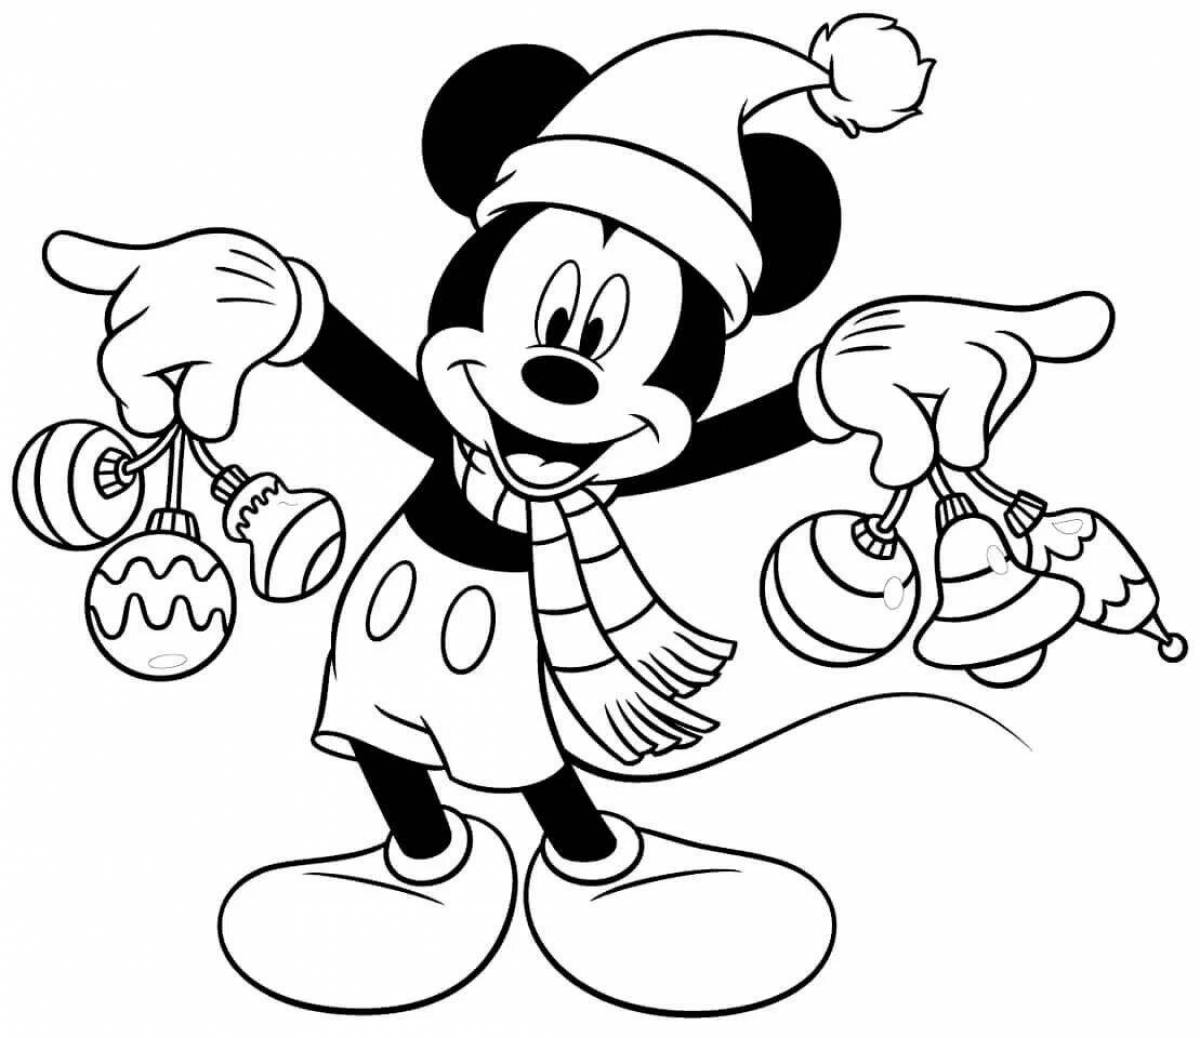 Mickey mouse creative coloring book